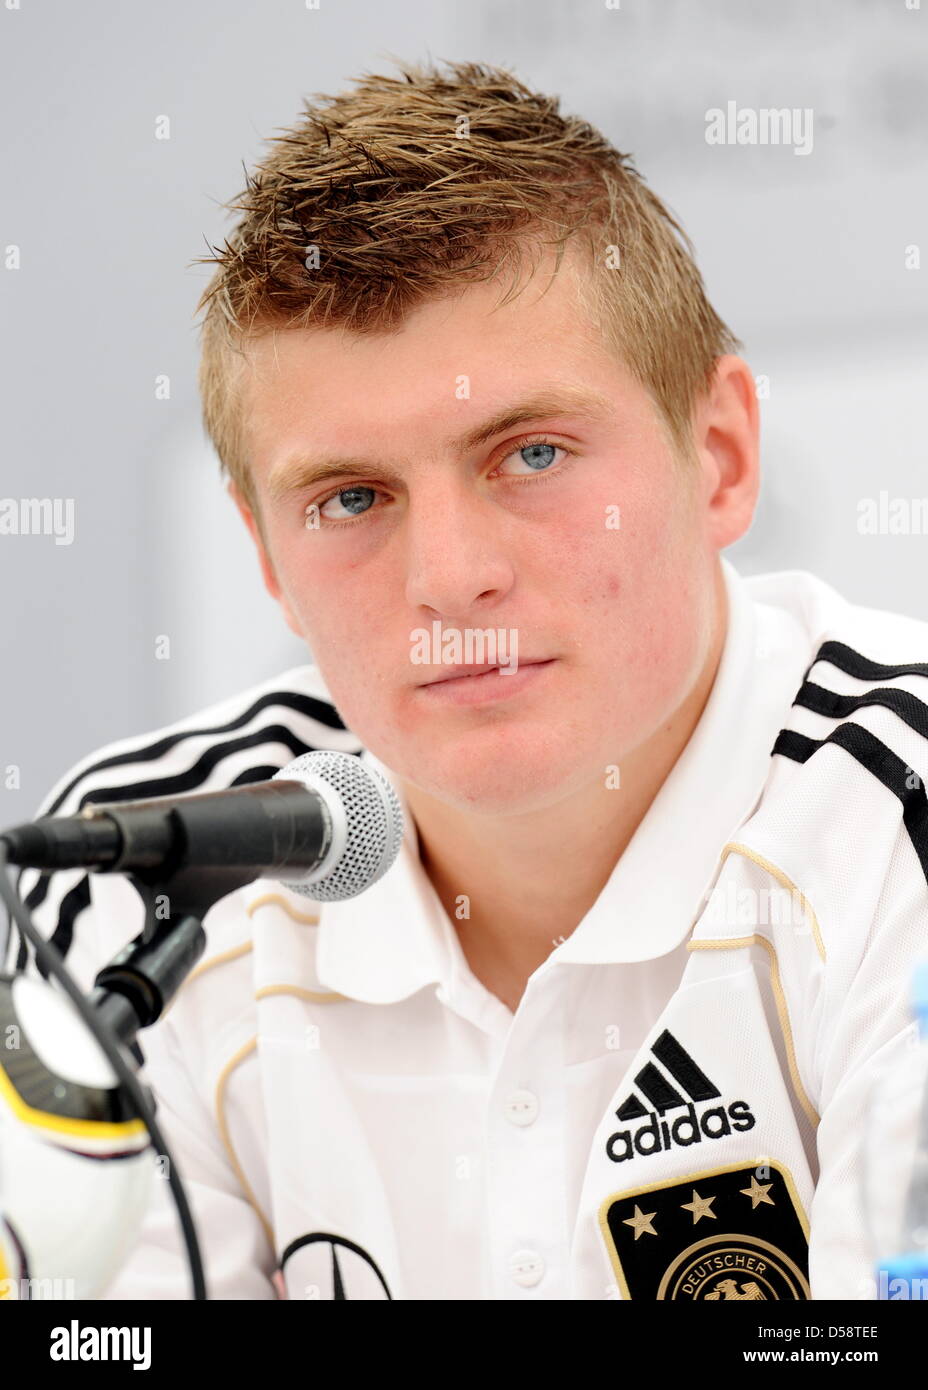 German international Toni Kroos pictured at a press conference of the German Football Association (DFB) in Eppan, Italy, 23 May 2010. The German national team prepares for the upcoming FIFA World Cup 2010 in South Africa in a training camp in Eppan, South Tirol until 02 June 2010. Photo: BERND WEISSBROD Stock Photo